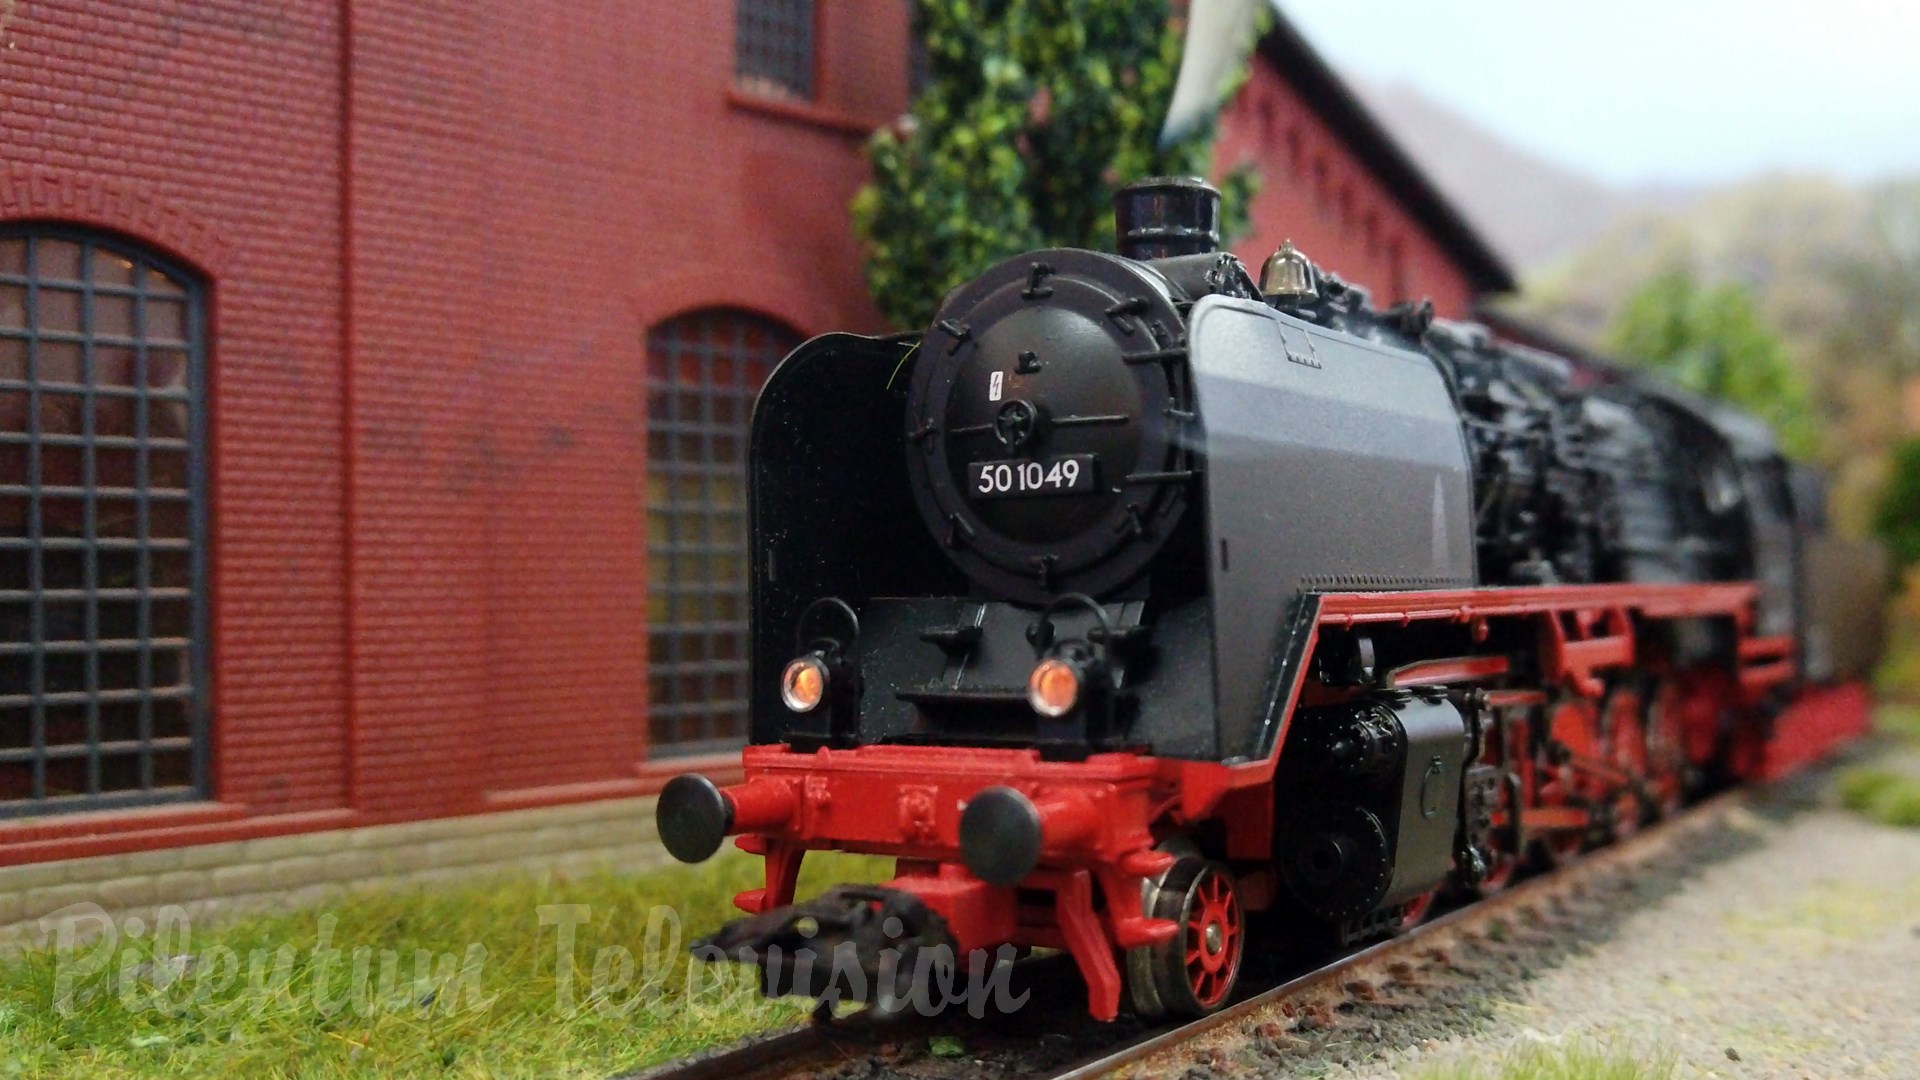 Model Railway Operations at the Steam Locomotive Engine Shed - Smoky Model Trains in HO Scale